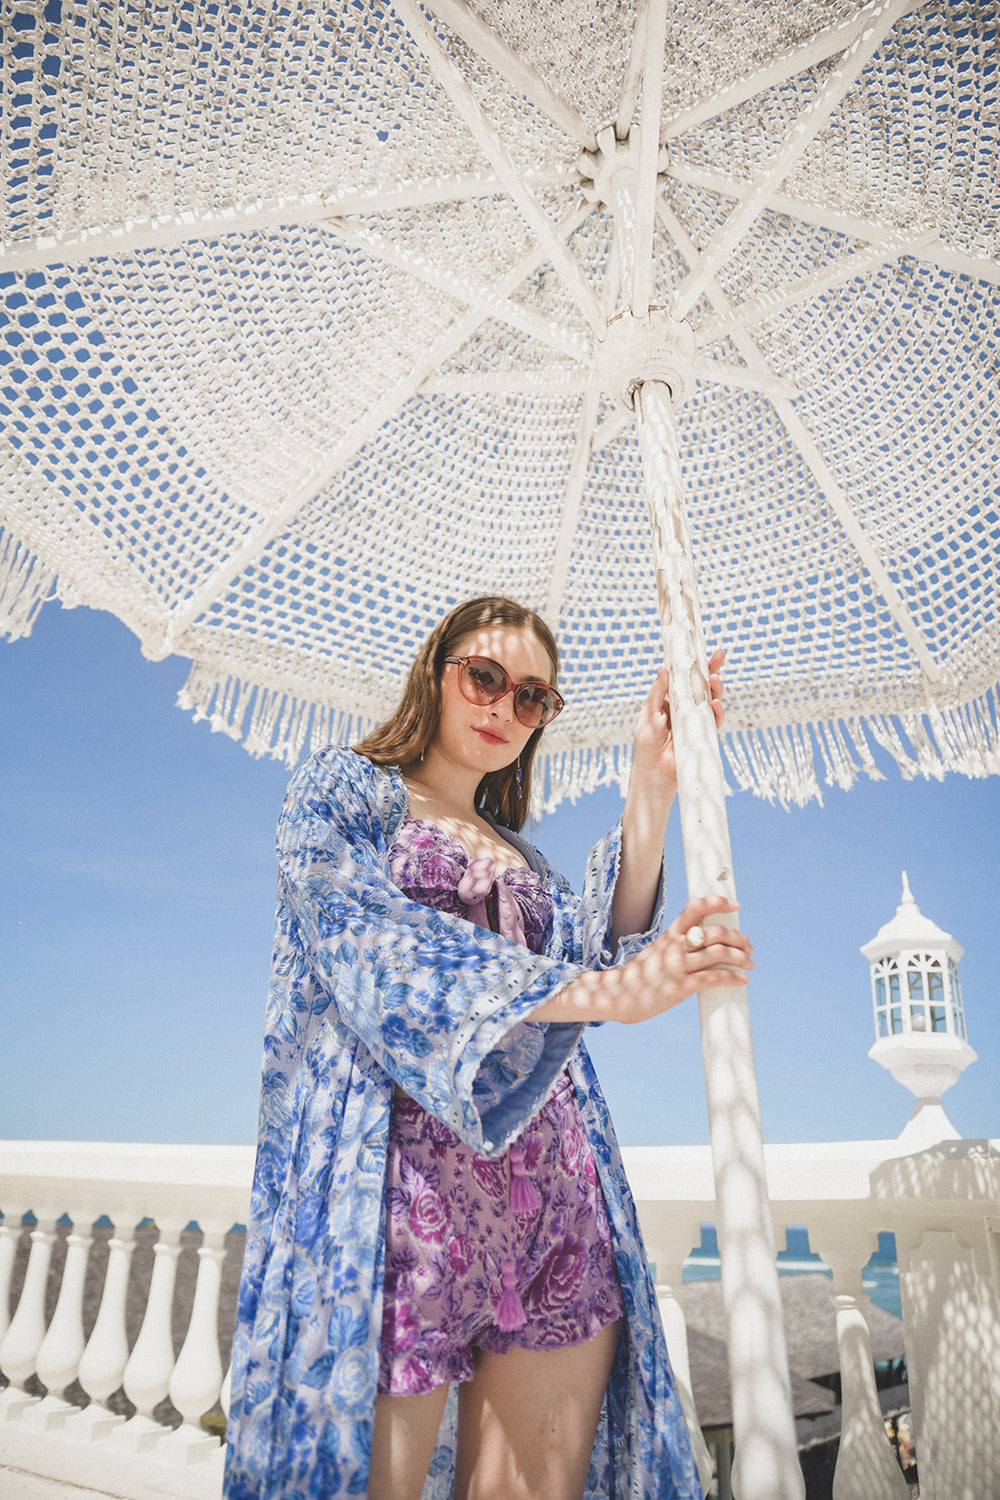 Experience the luxury of lounging in style with the Peony Long Robe, a kimono masterpiece from Tulle and Batiste's Peony collection, ethically handmade by Balinese artisans